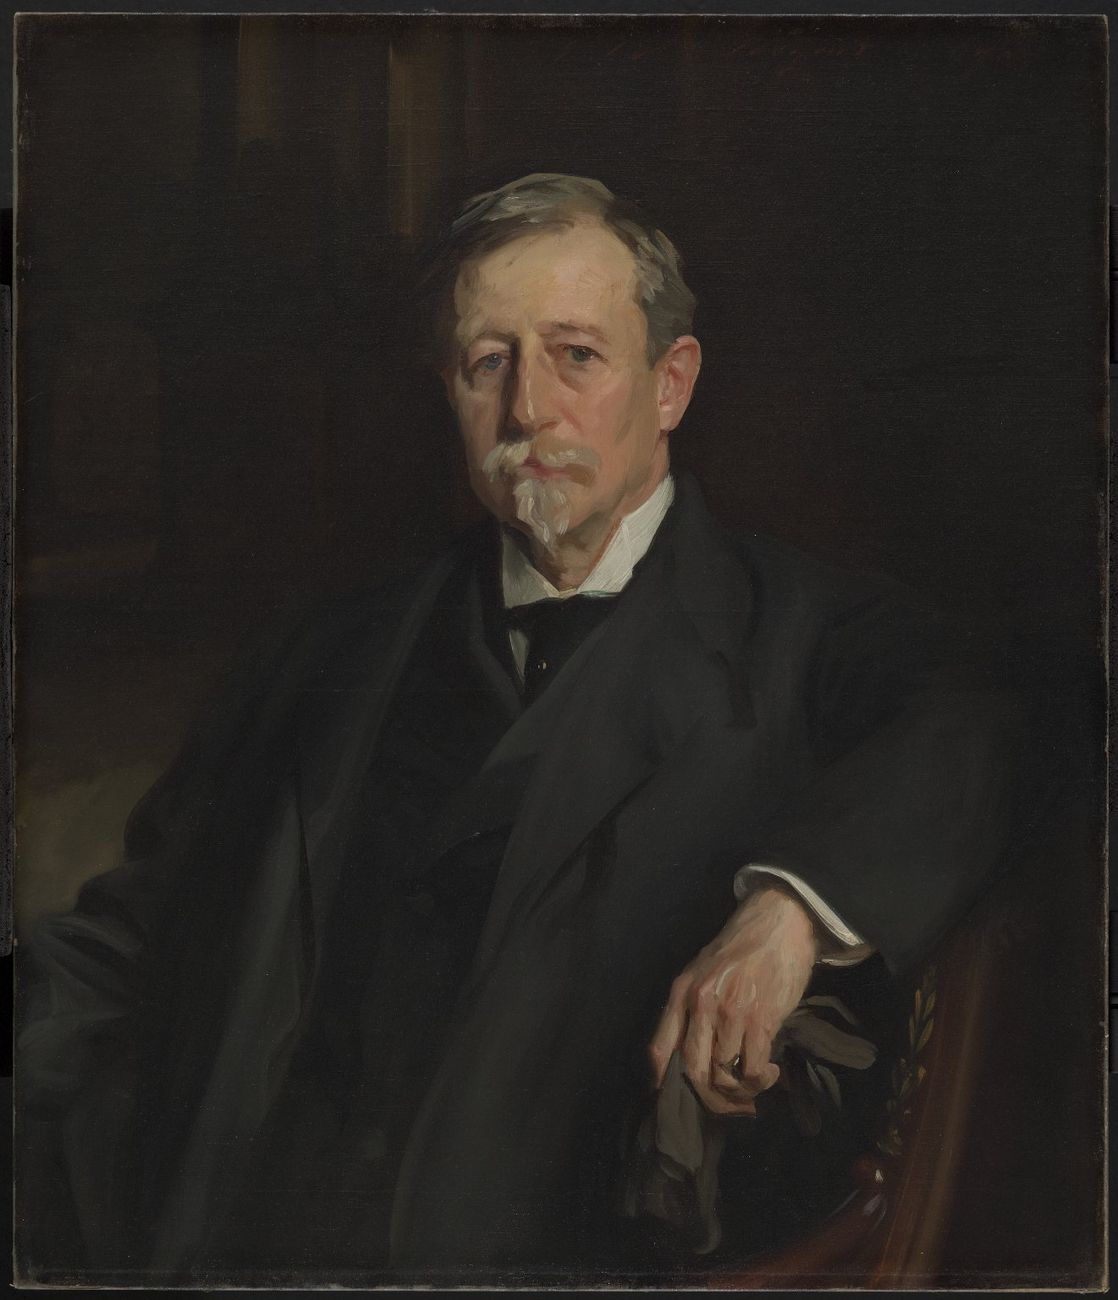 John Singer Sargent, Ritratto di Aaron Augustus Healy, 1907. New York, Brooklyn Museum